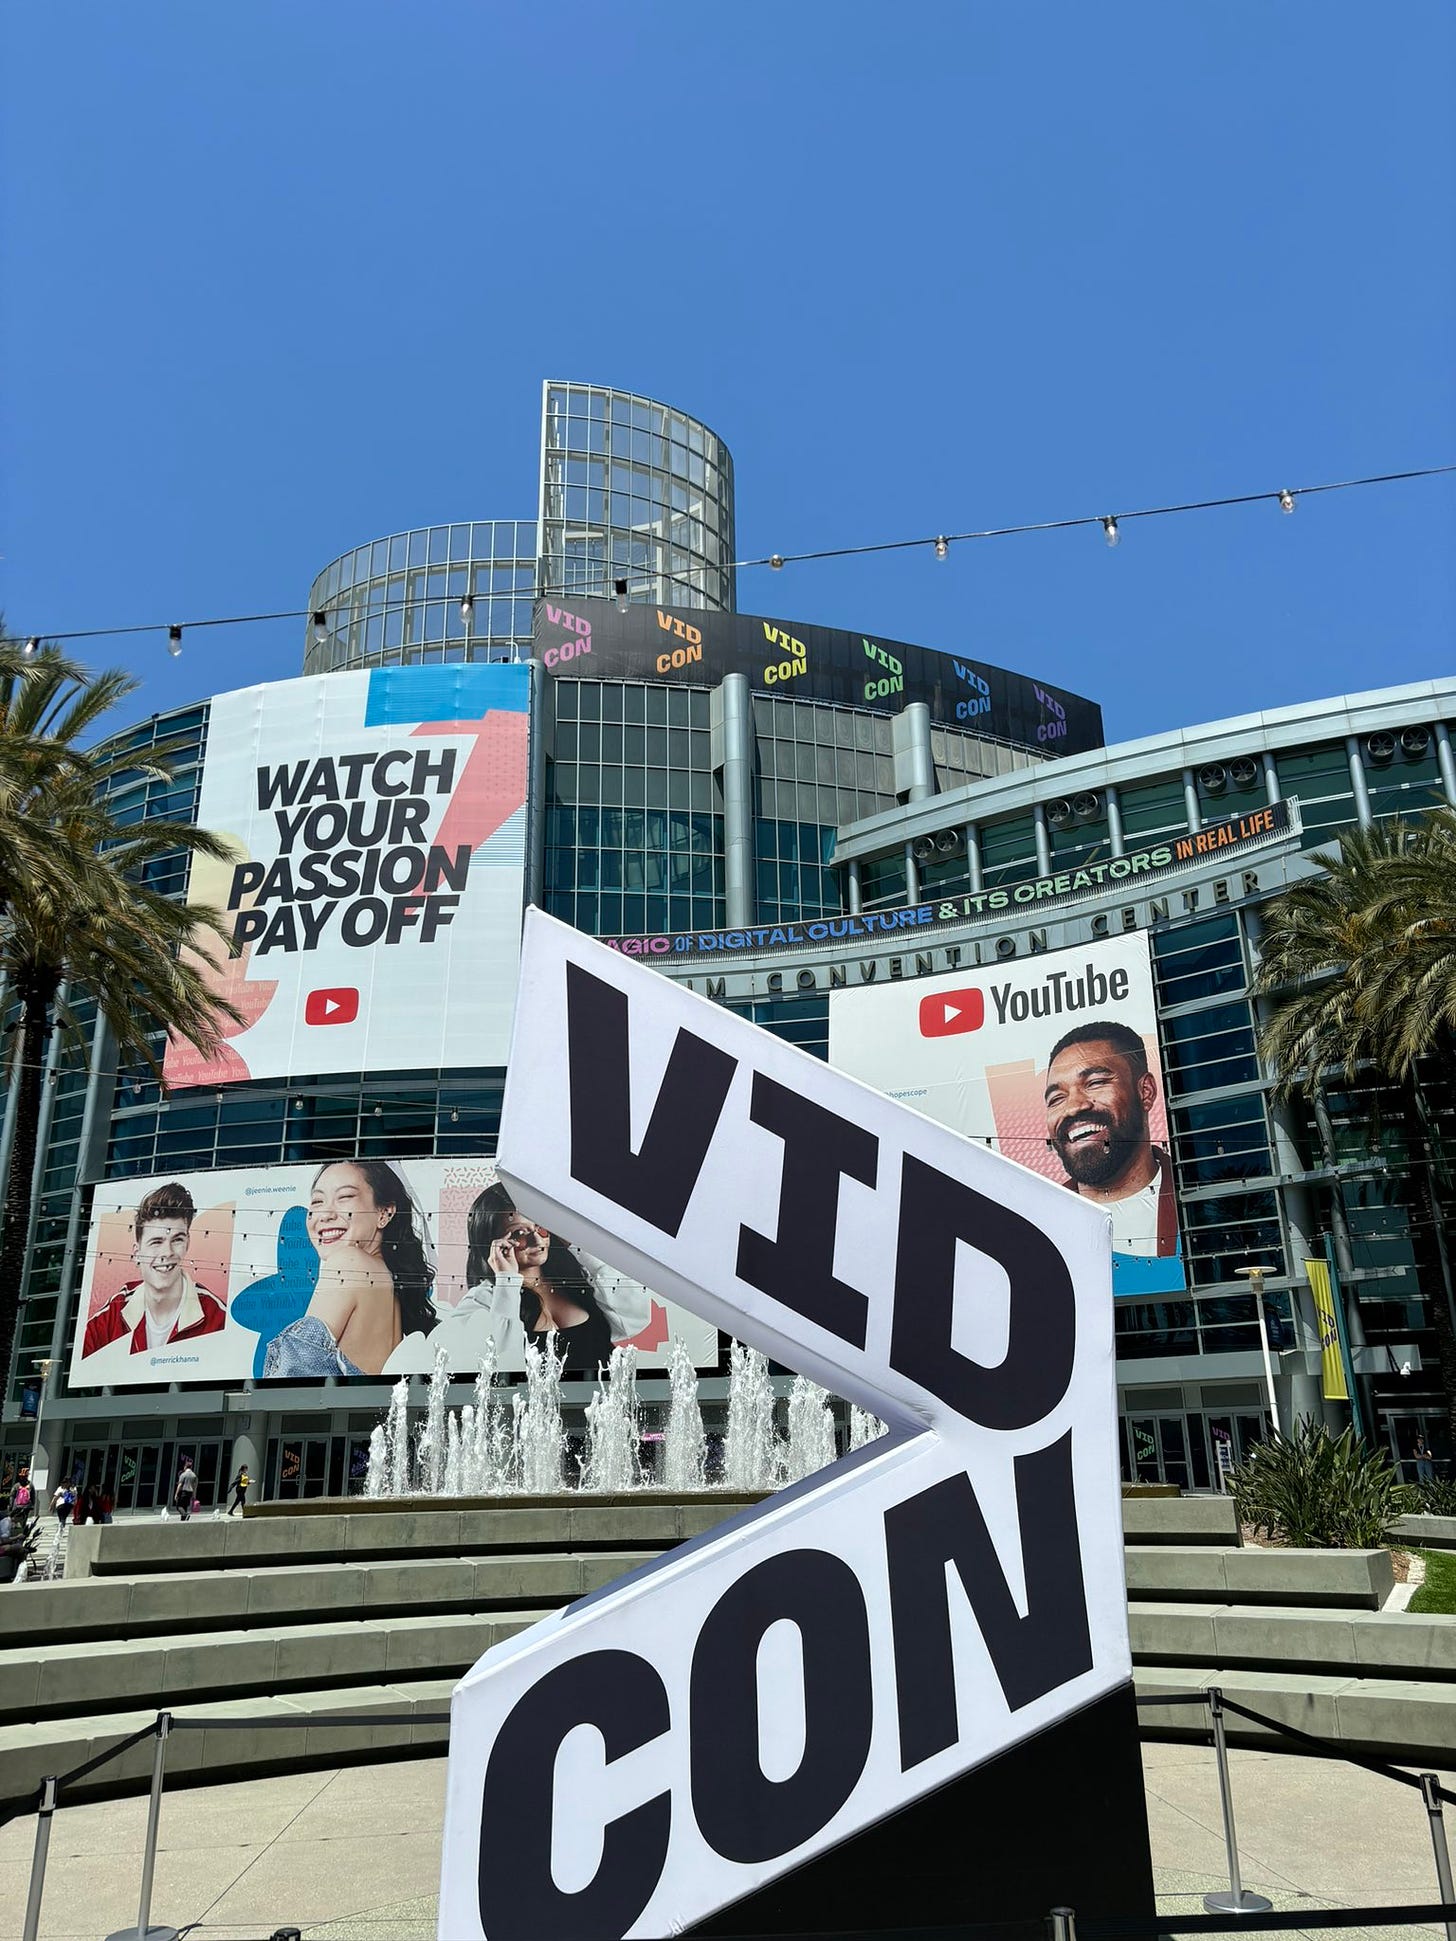 Screenshot of a VidCon conference image. In the foreground is a large sign that says VidCon. The Anaheim Convention Center is in the background. A banner on the building says: Watch your passion pay off